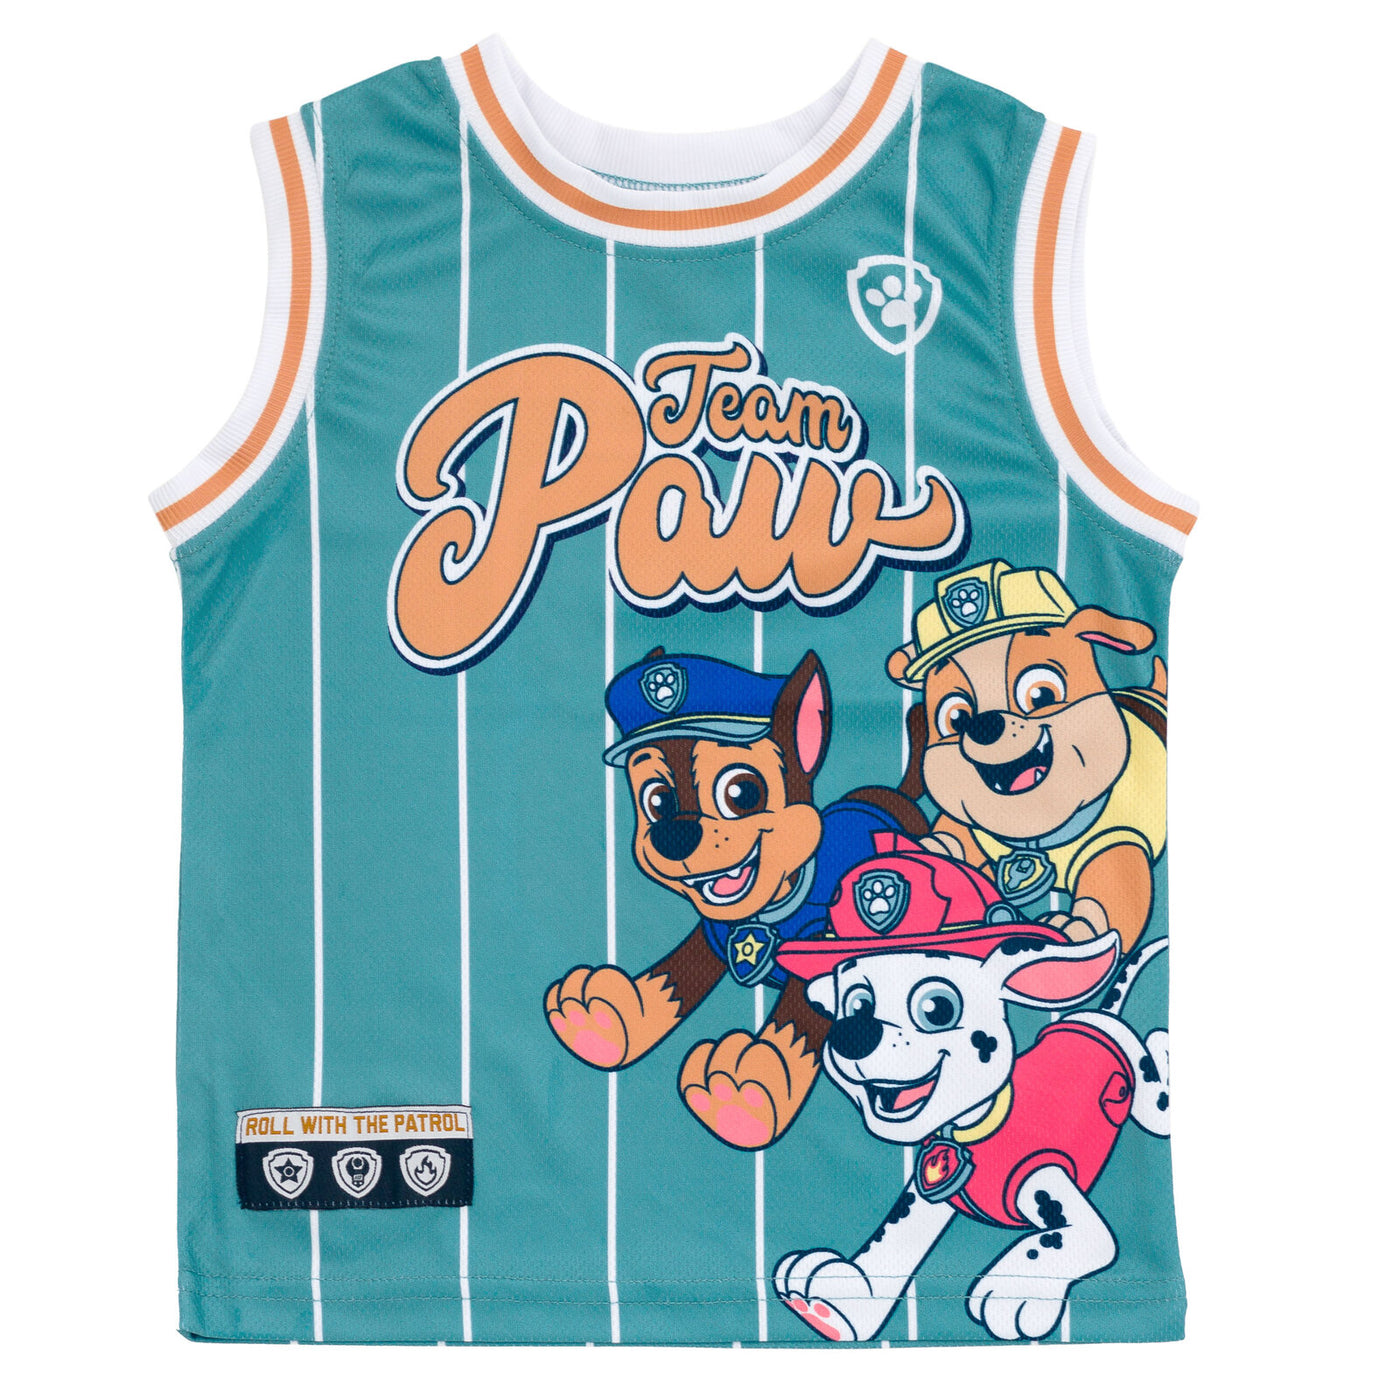 Paw Patrol Mesh Jersey Tank Top and Basketball Shorts Athletic Outfit Set